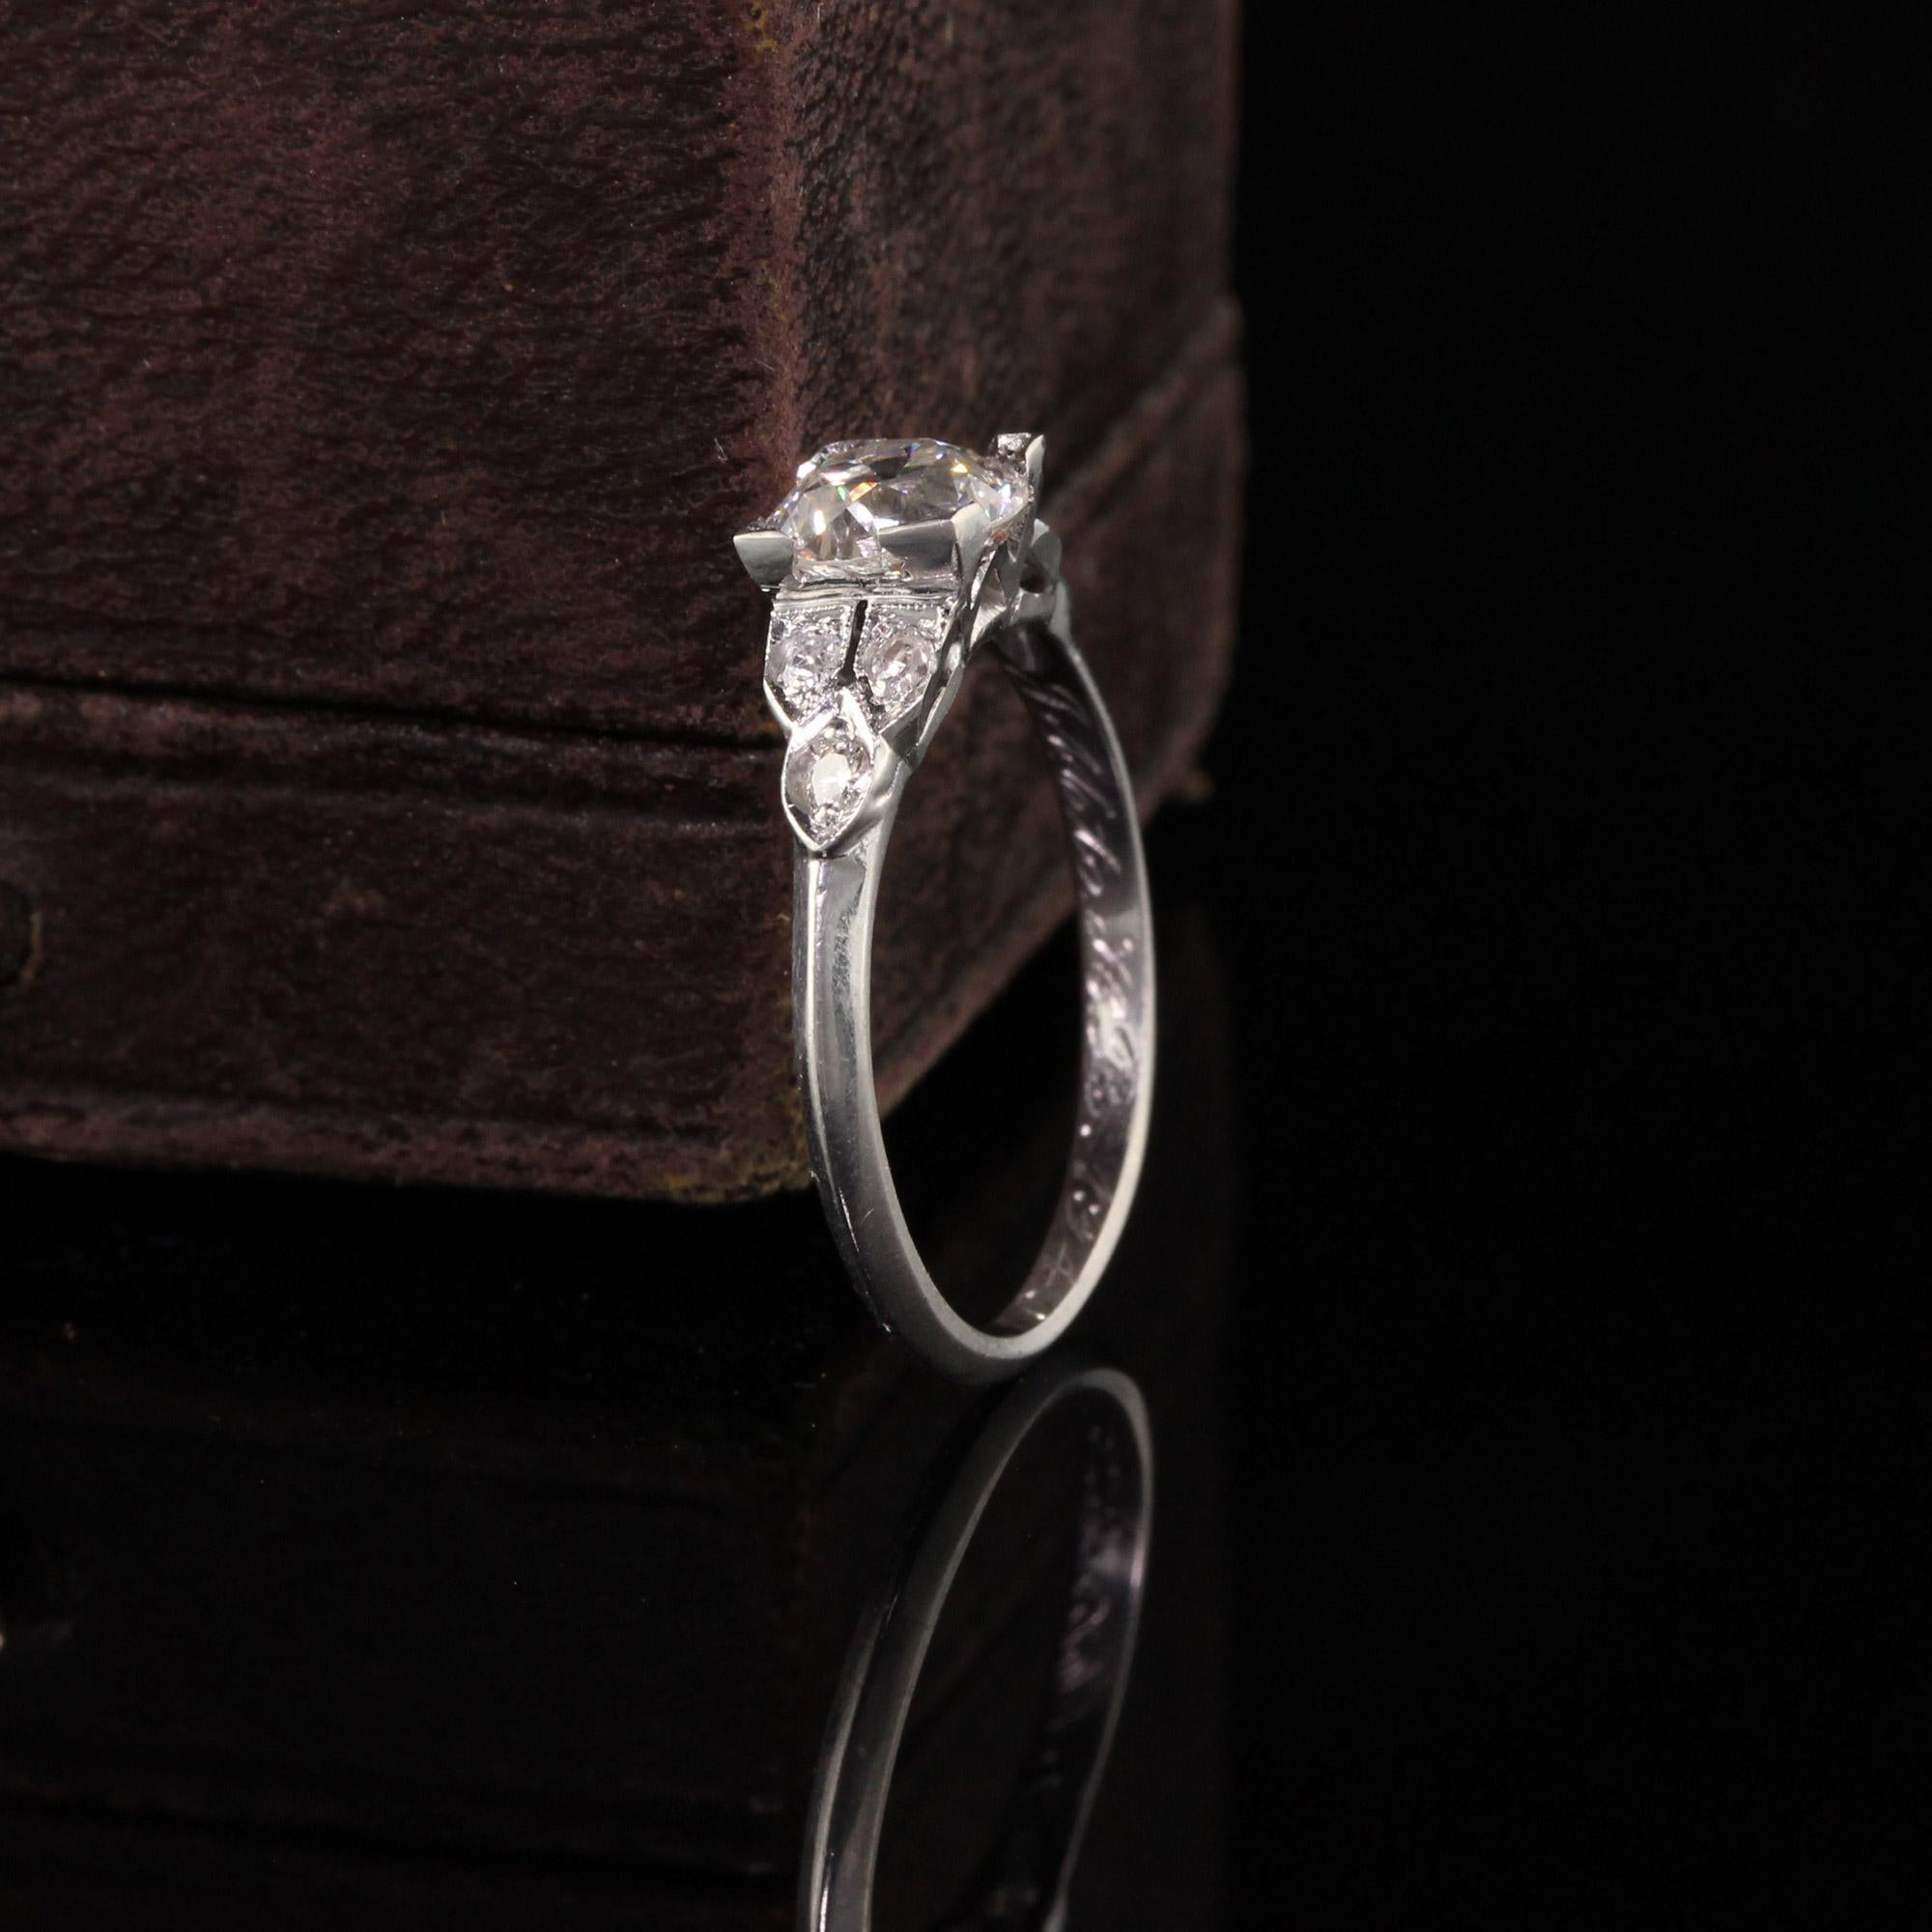 Gorgeous Antique Art Deco Platinum Old European Diamond Engagement Ring - GIA. This beautiful engagement ring has a .85 ct GIA certified old european cut diamond that is I color and SI1 clarity. It is set in a gorgeous classic art deco mounting.